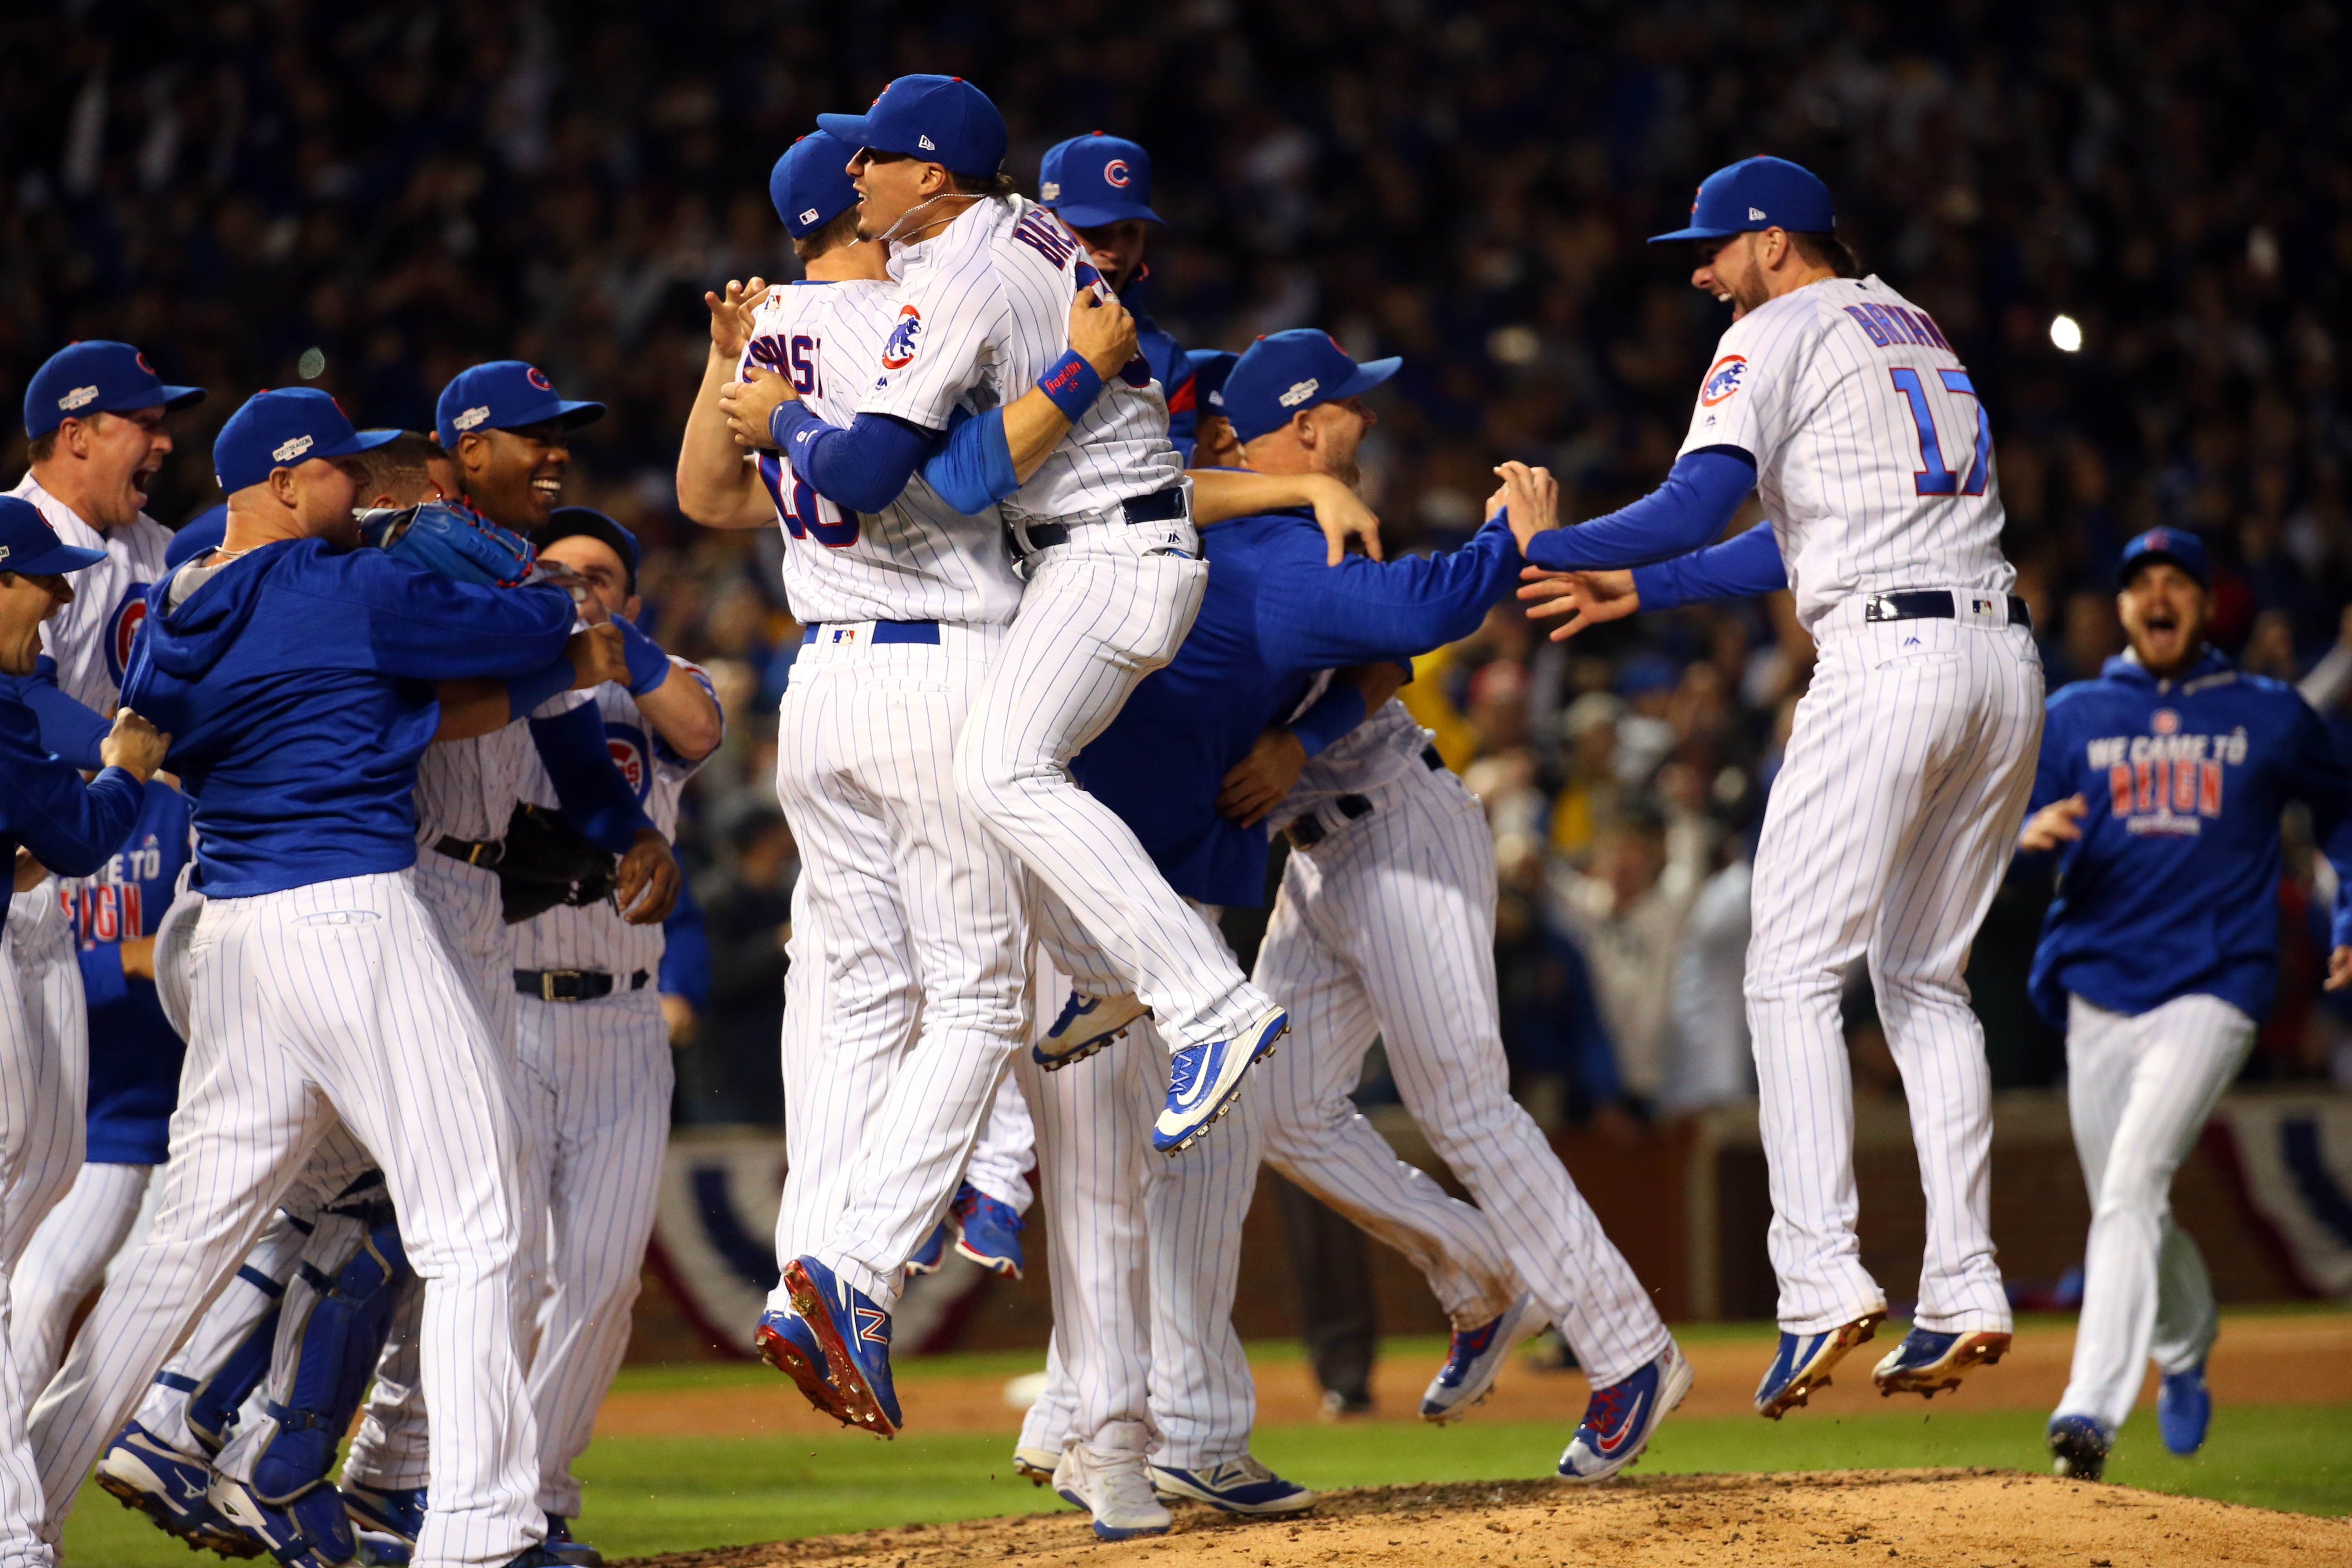 Cubs shut out Dodgers, advance to first World Series since 1945